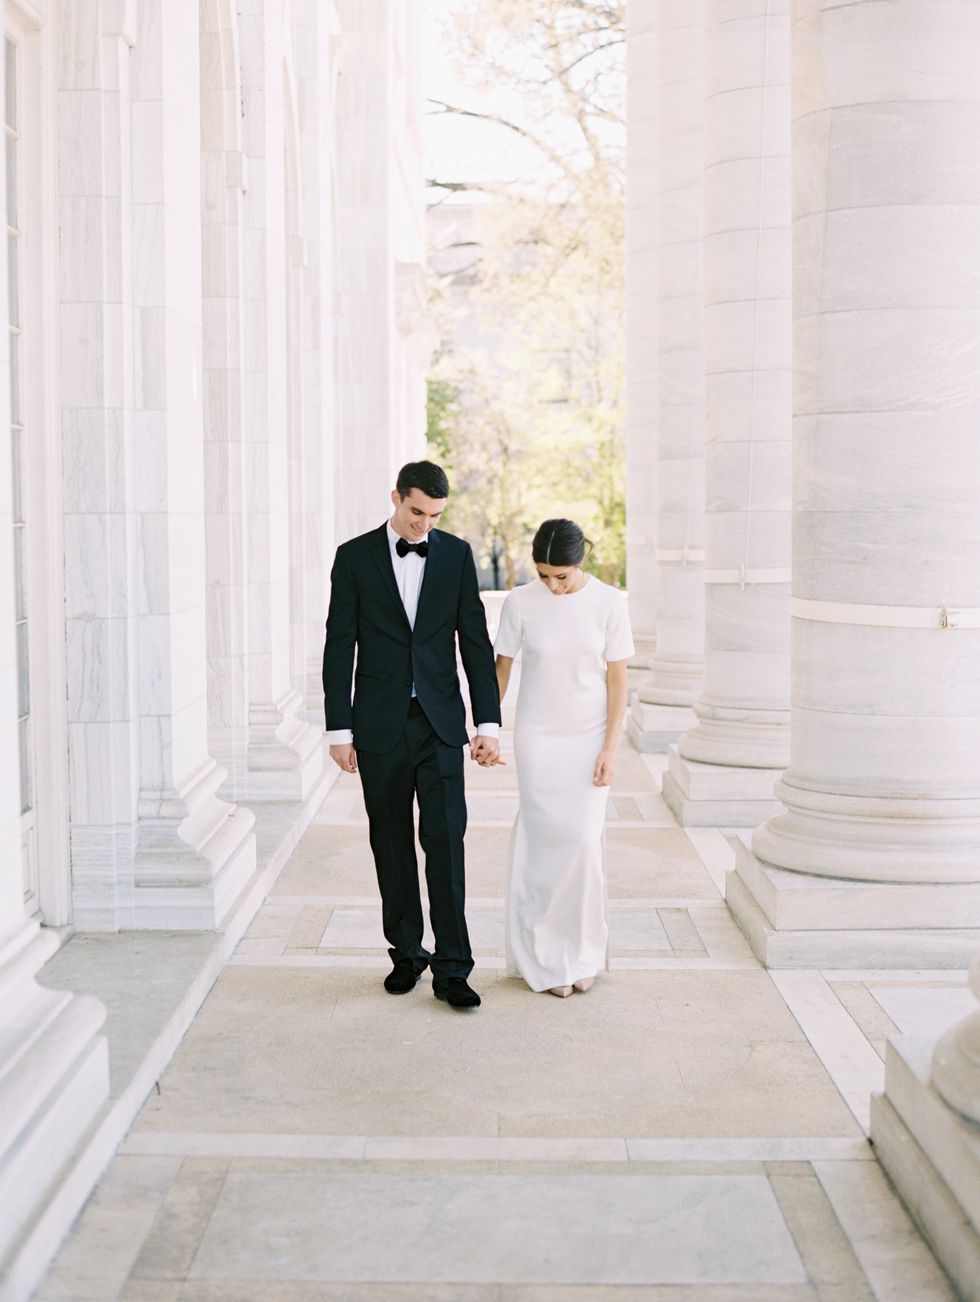 <p>The San Jose-based pair (who both serve as directors of the Bay to Bay Volleyball Club) wanted to incorporate California's effortless feel into their East Coast wedding. The result? A laid-back yet black-tie affair in the nation's capitol.</p>